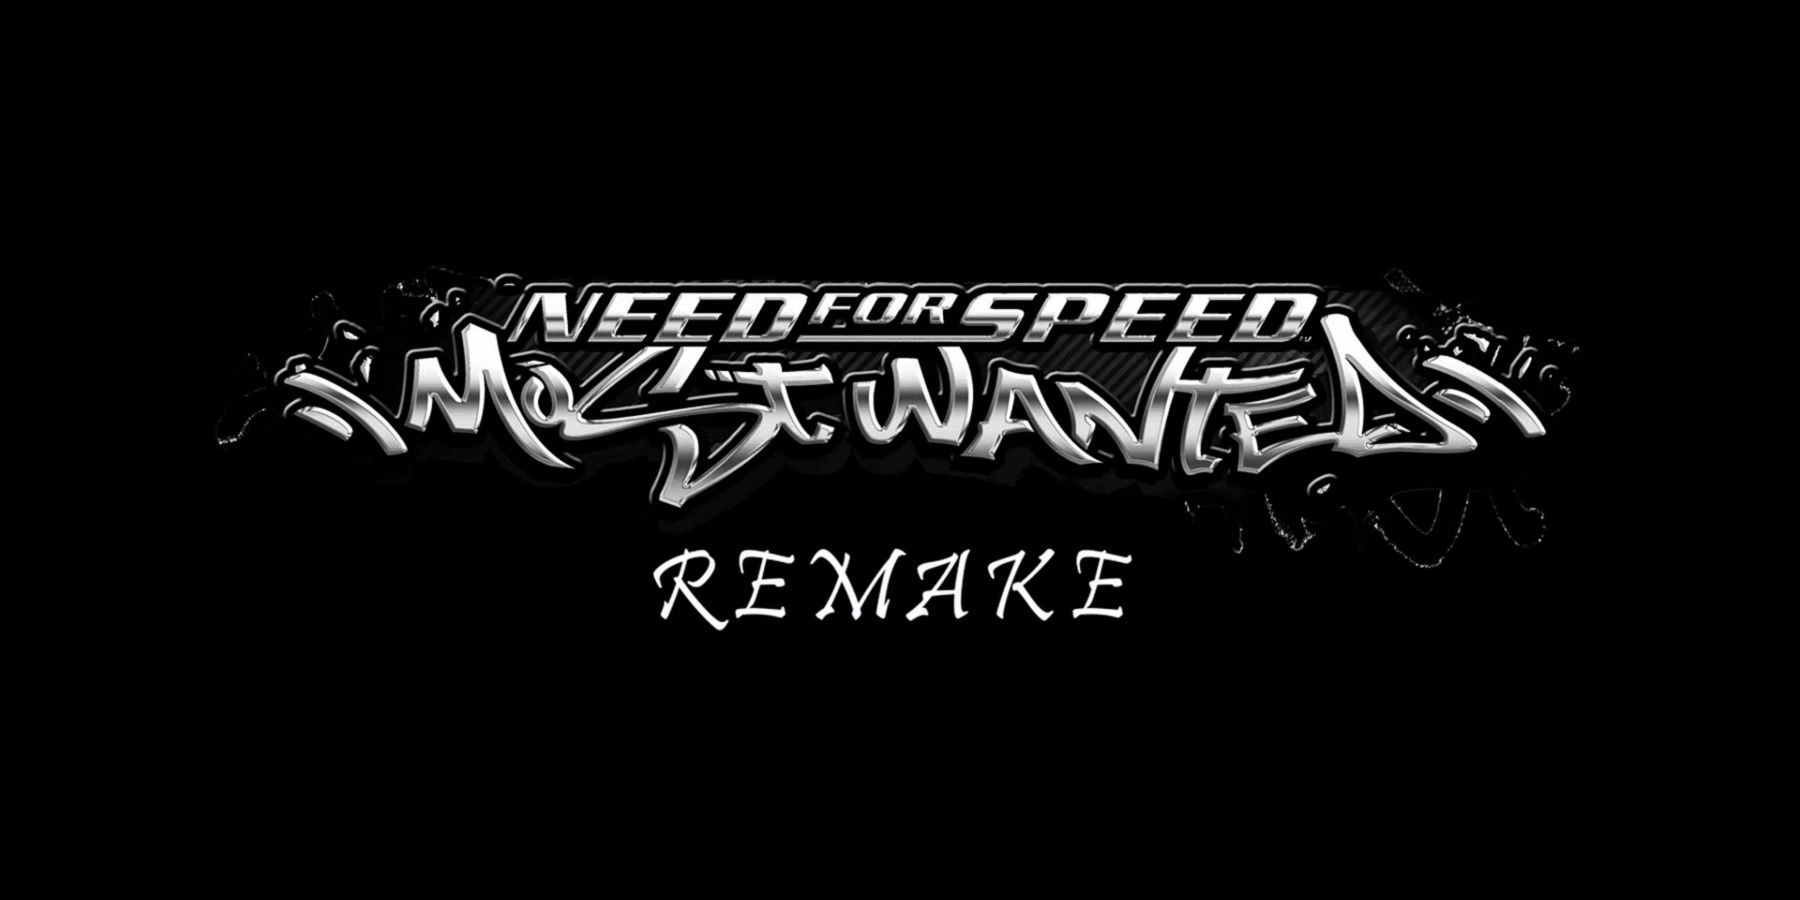 Need for Speed II | PS1FUN Play Retro Playstation PSX games online.